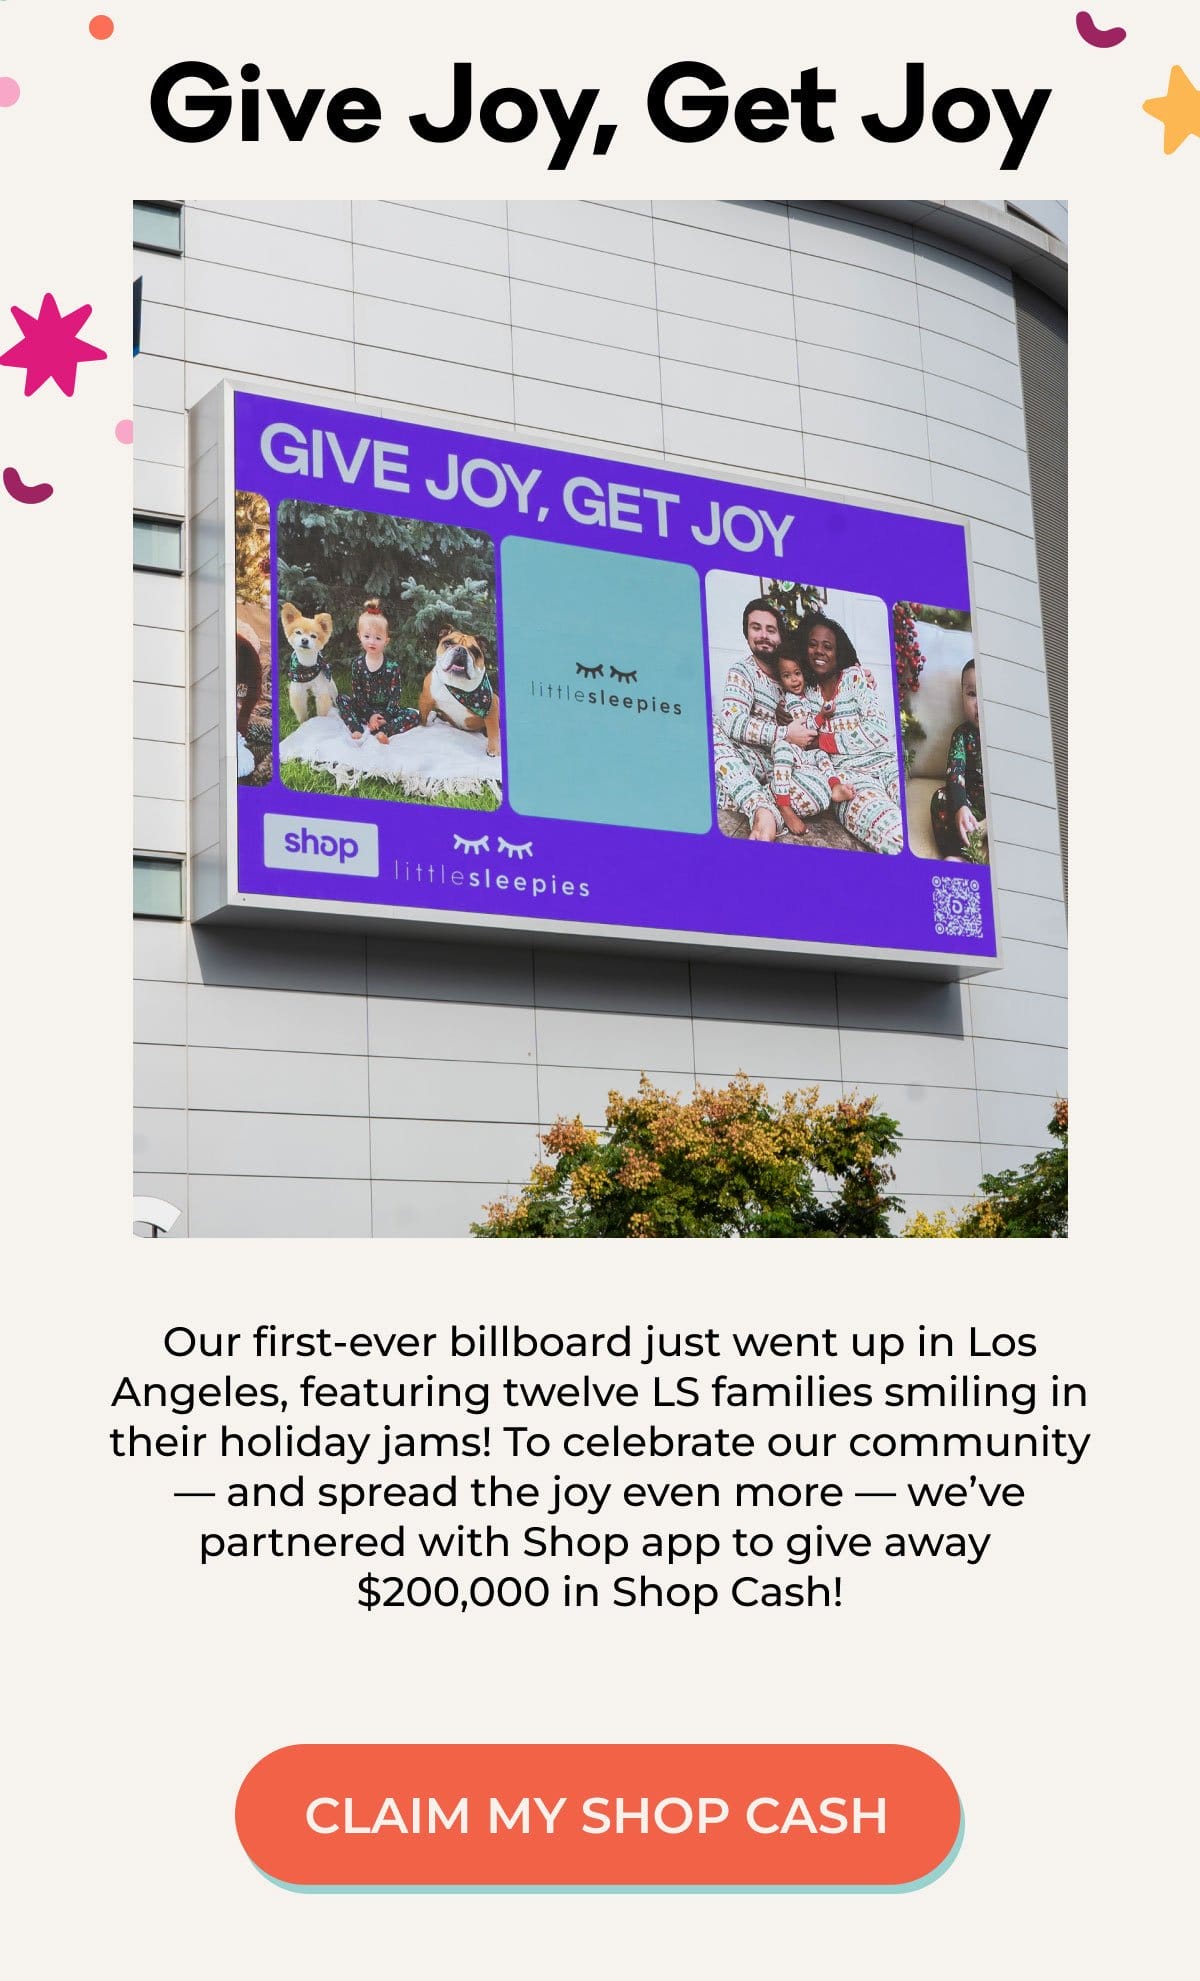 Give Joy, Get Joy | Our first-ever billboard just went up in Los Angeles, featuring twelve LS families smiling in their holiday jams! To celebrate our community - and spread the joy even more - we've partnered with Shop app to give away \\$200,000 in Shop Cash! | CLAIM MY SHOP CASH